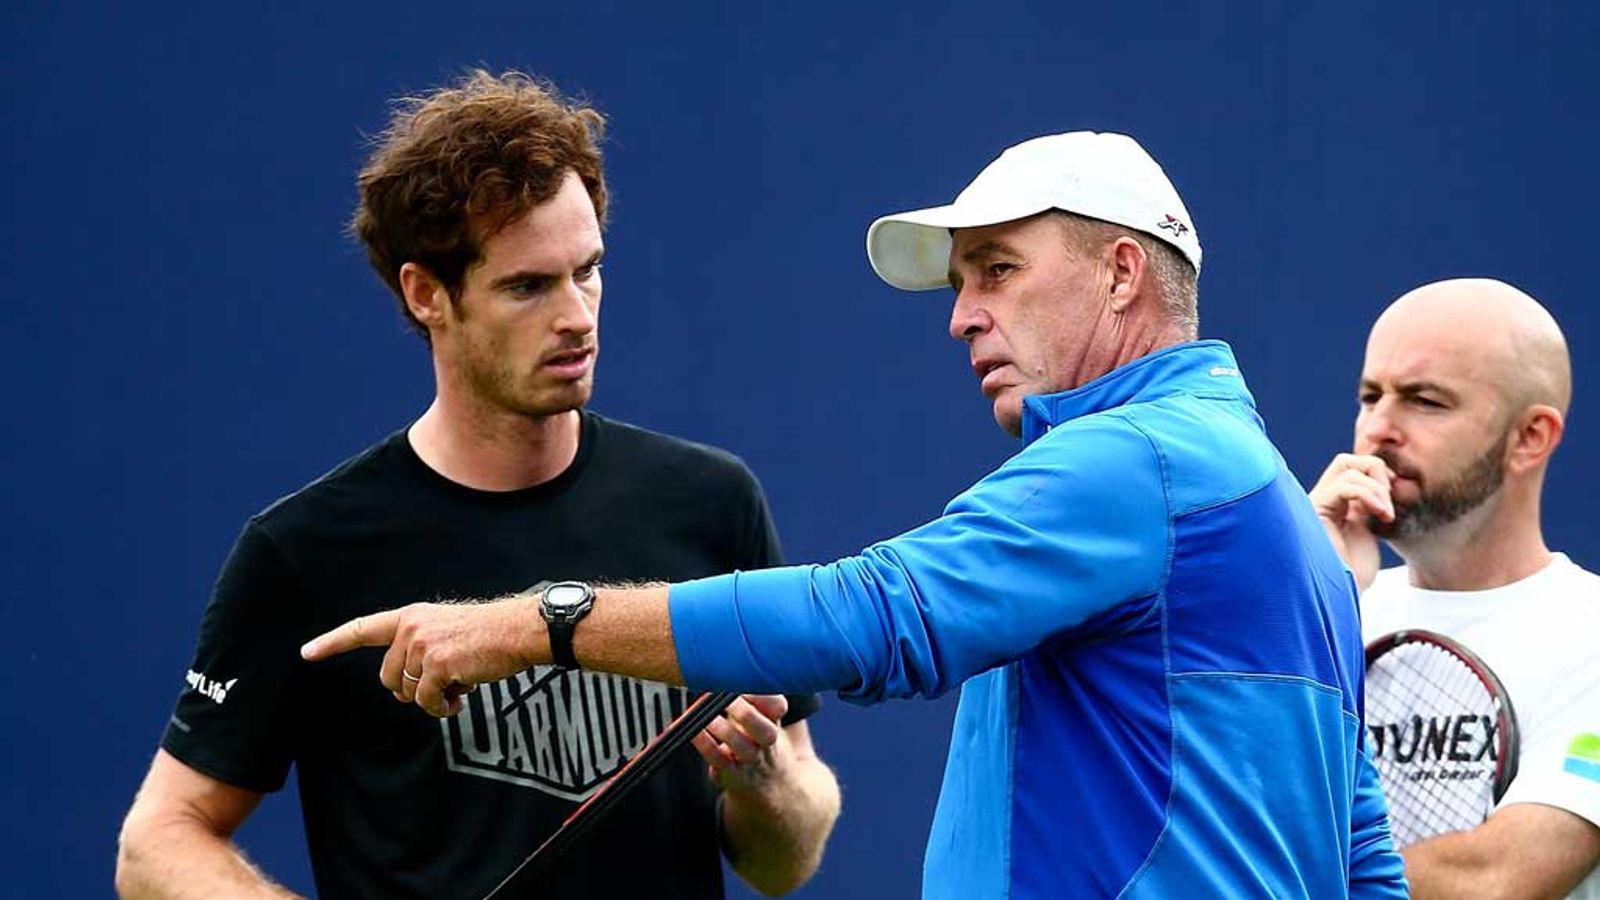 Andy Murray thrilled to link up again with coach Ivan Lendl Tennis